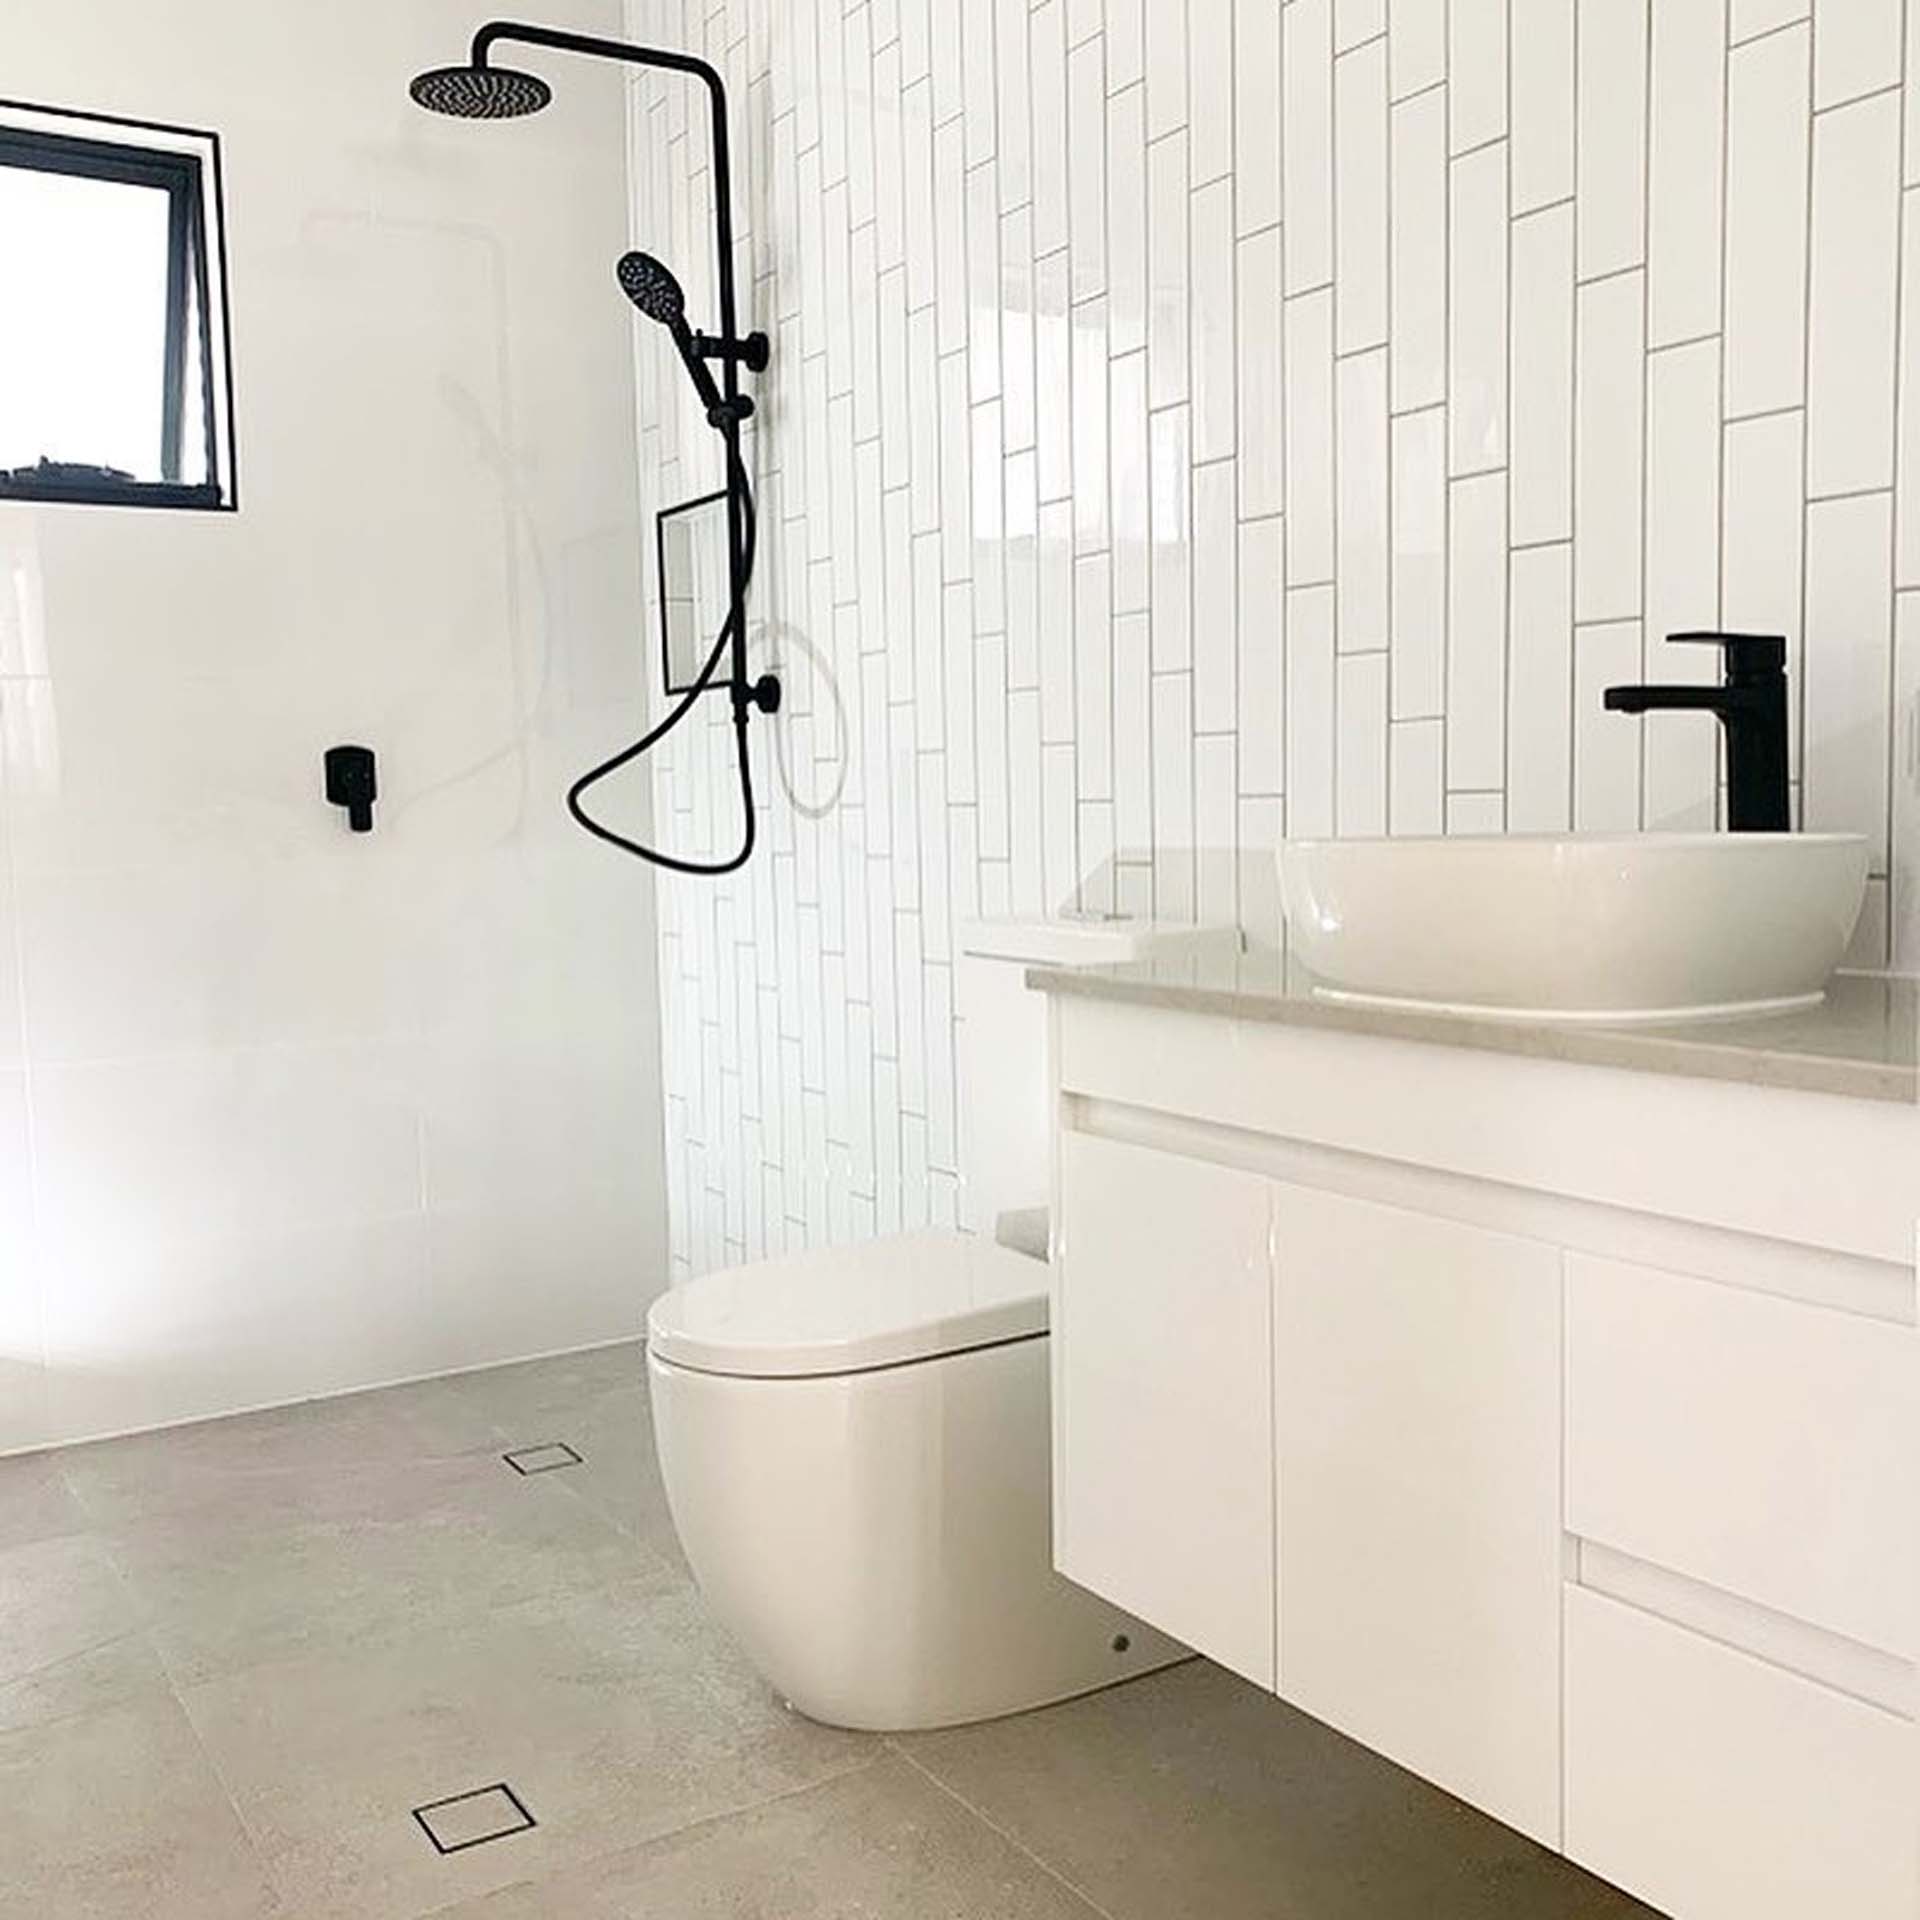 Photo of Bathroom after renovation | Featured image for Different Types of Toilets for Your Home blog for Akins Plumbing.